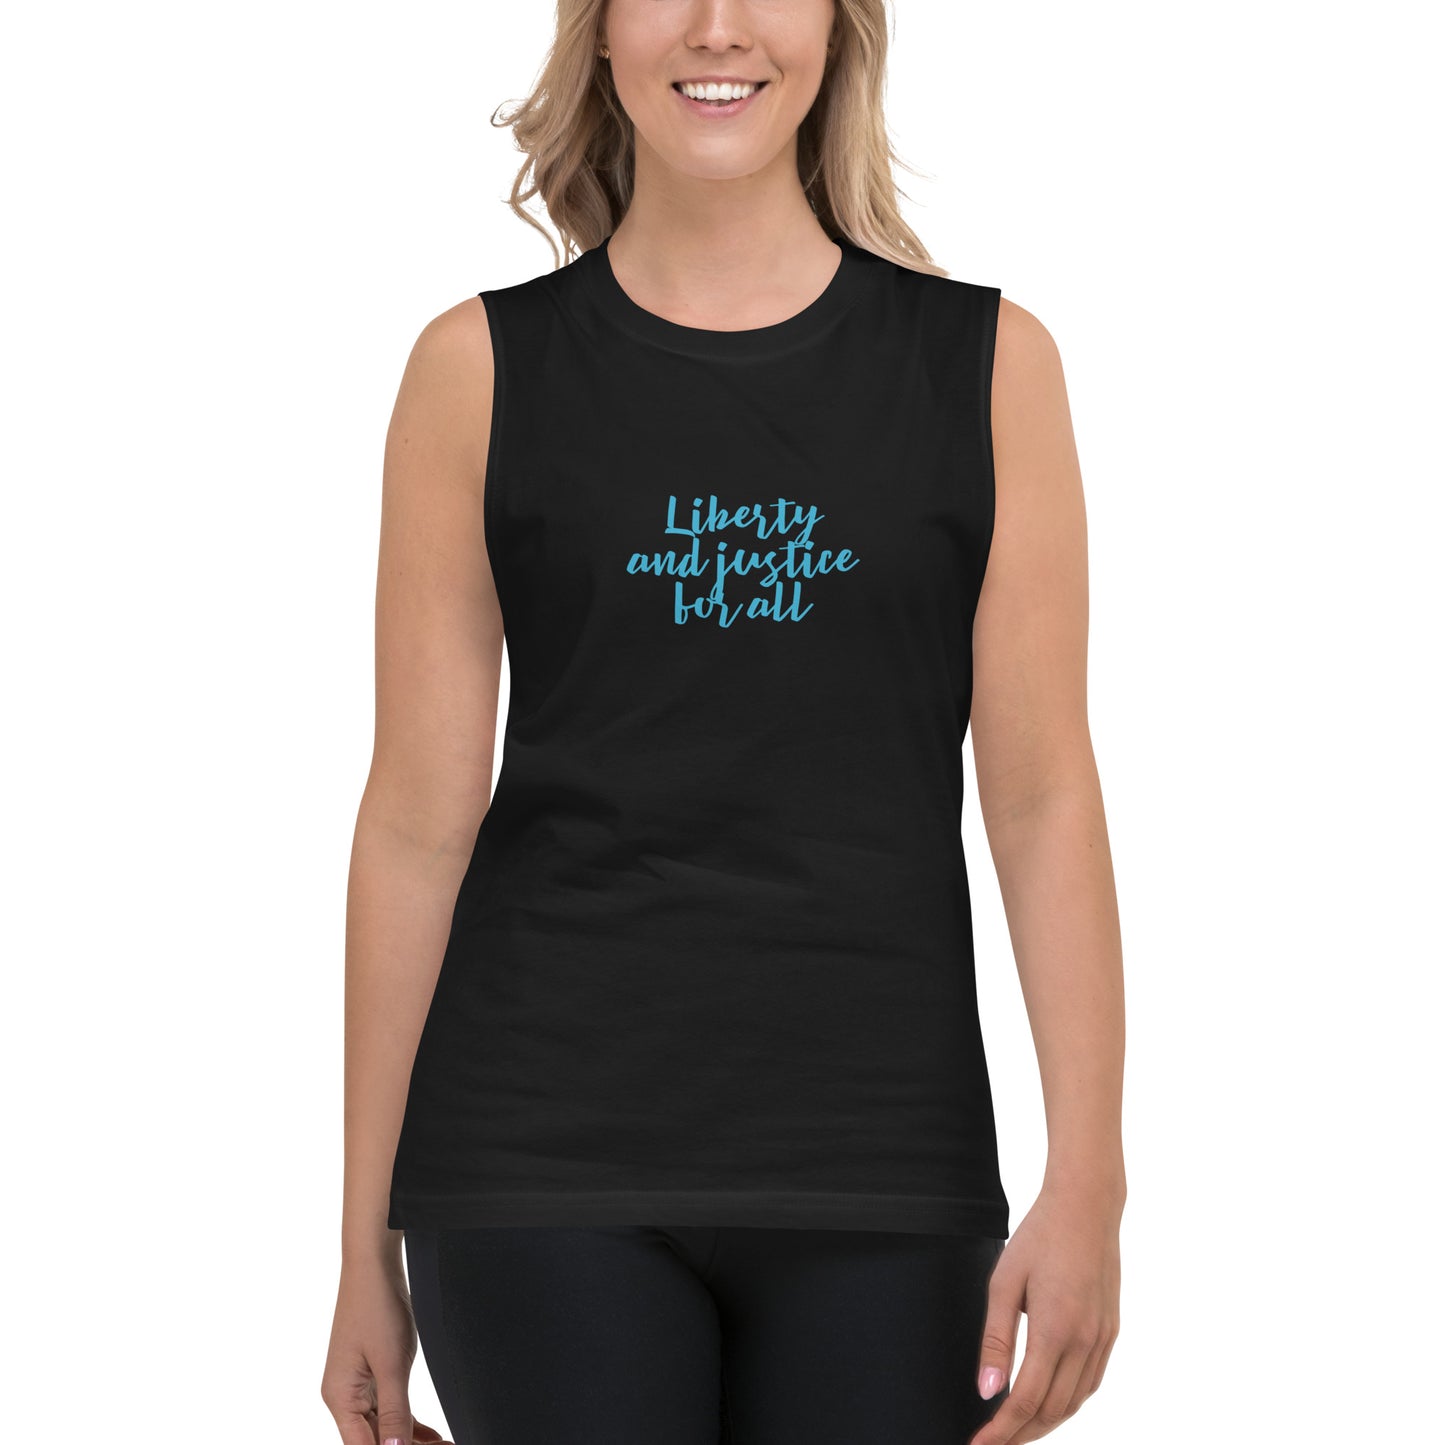 Liberty and justice for all, Muscle Shirt